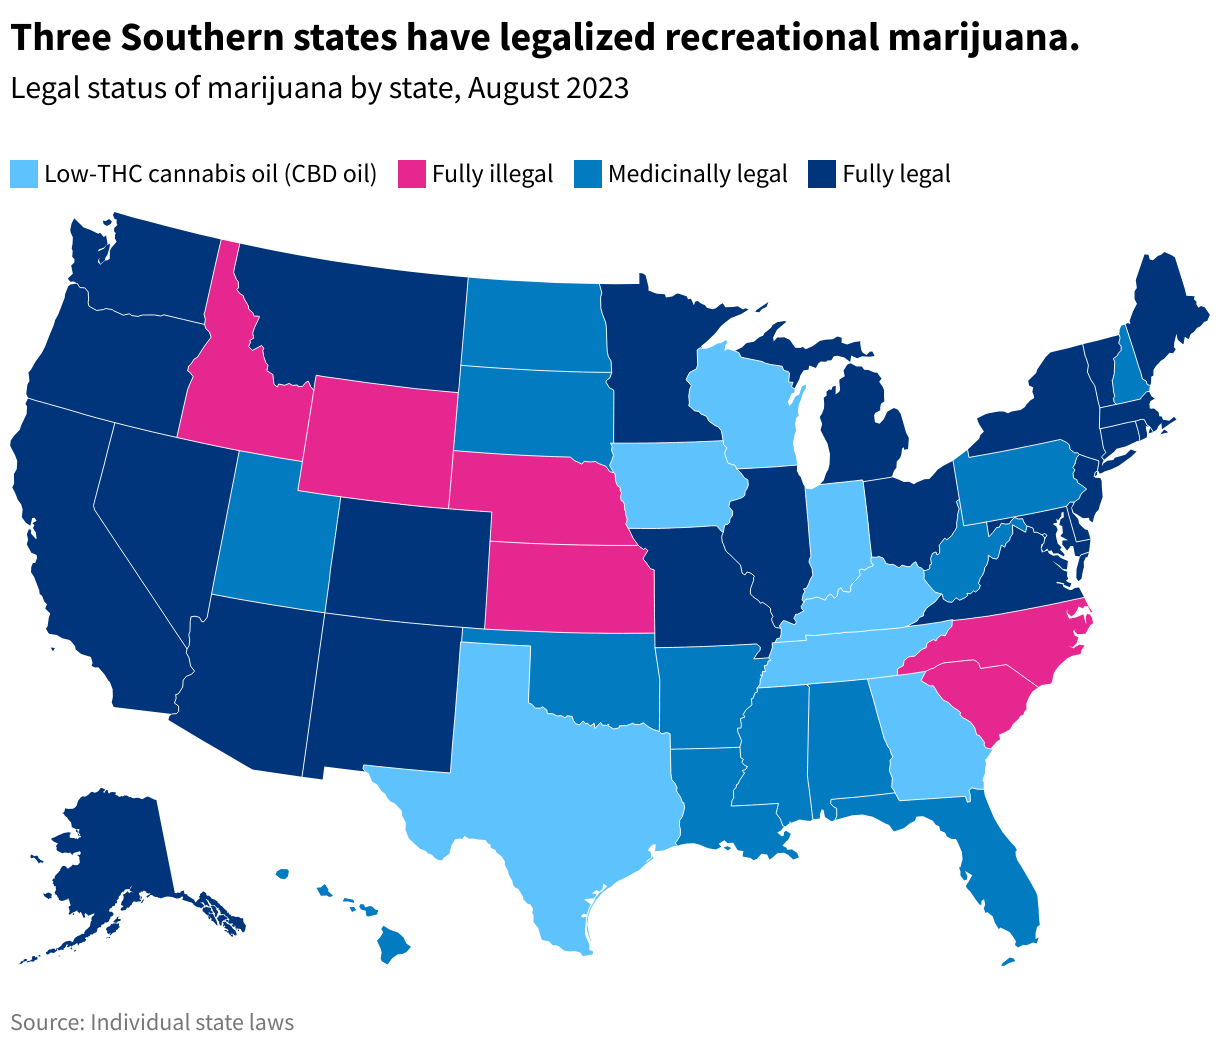 Map showing the legal status of marijuana by state, August 2023. 23 states have legalized recreational marijuana. 